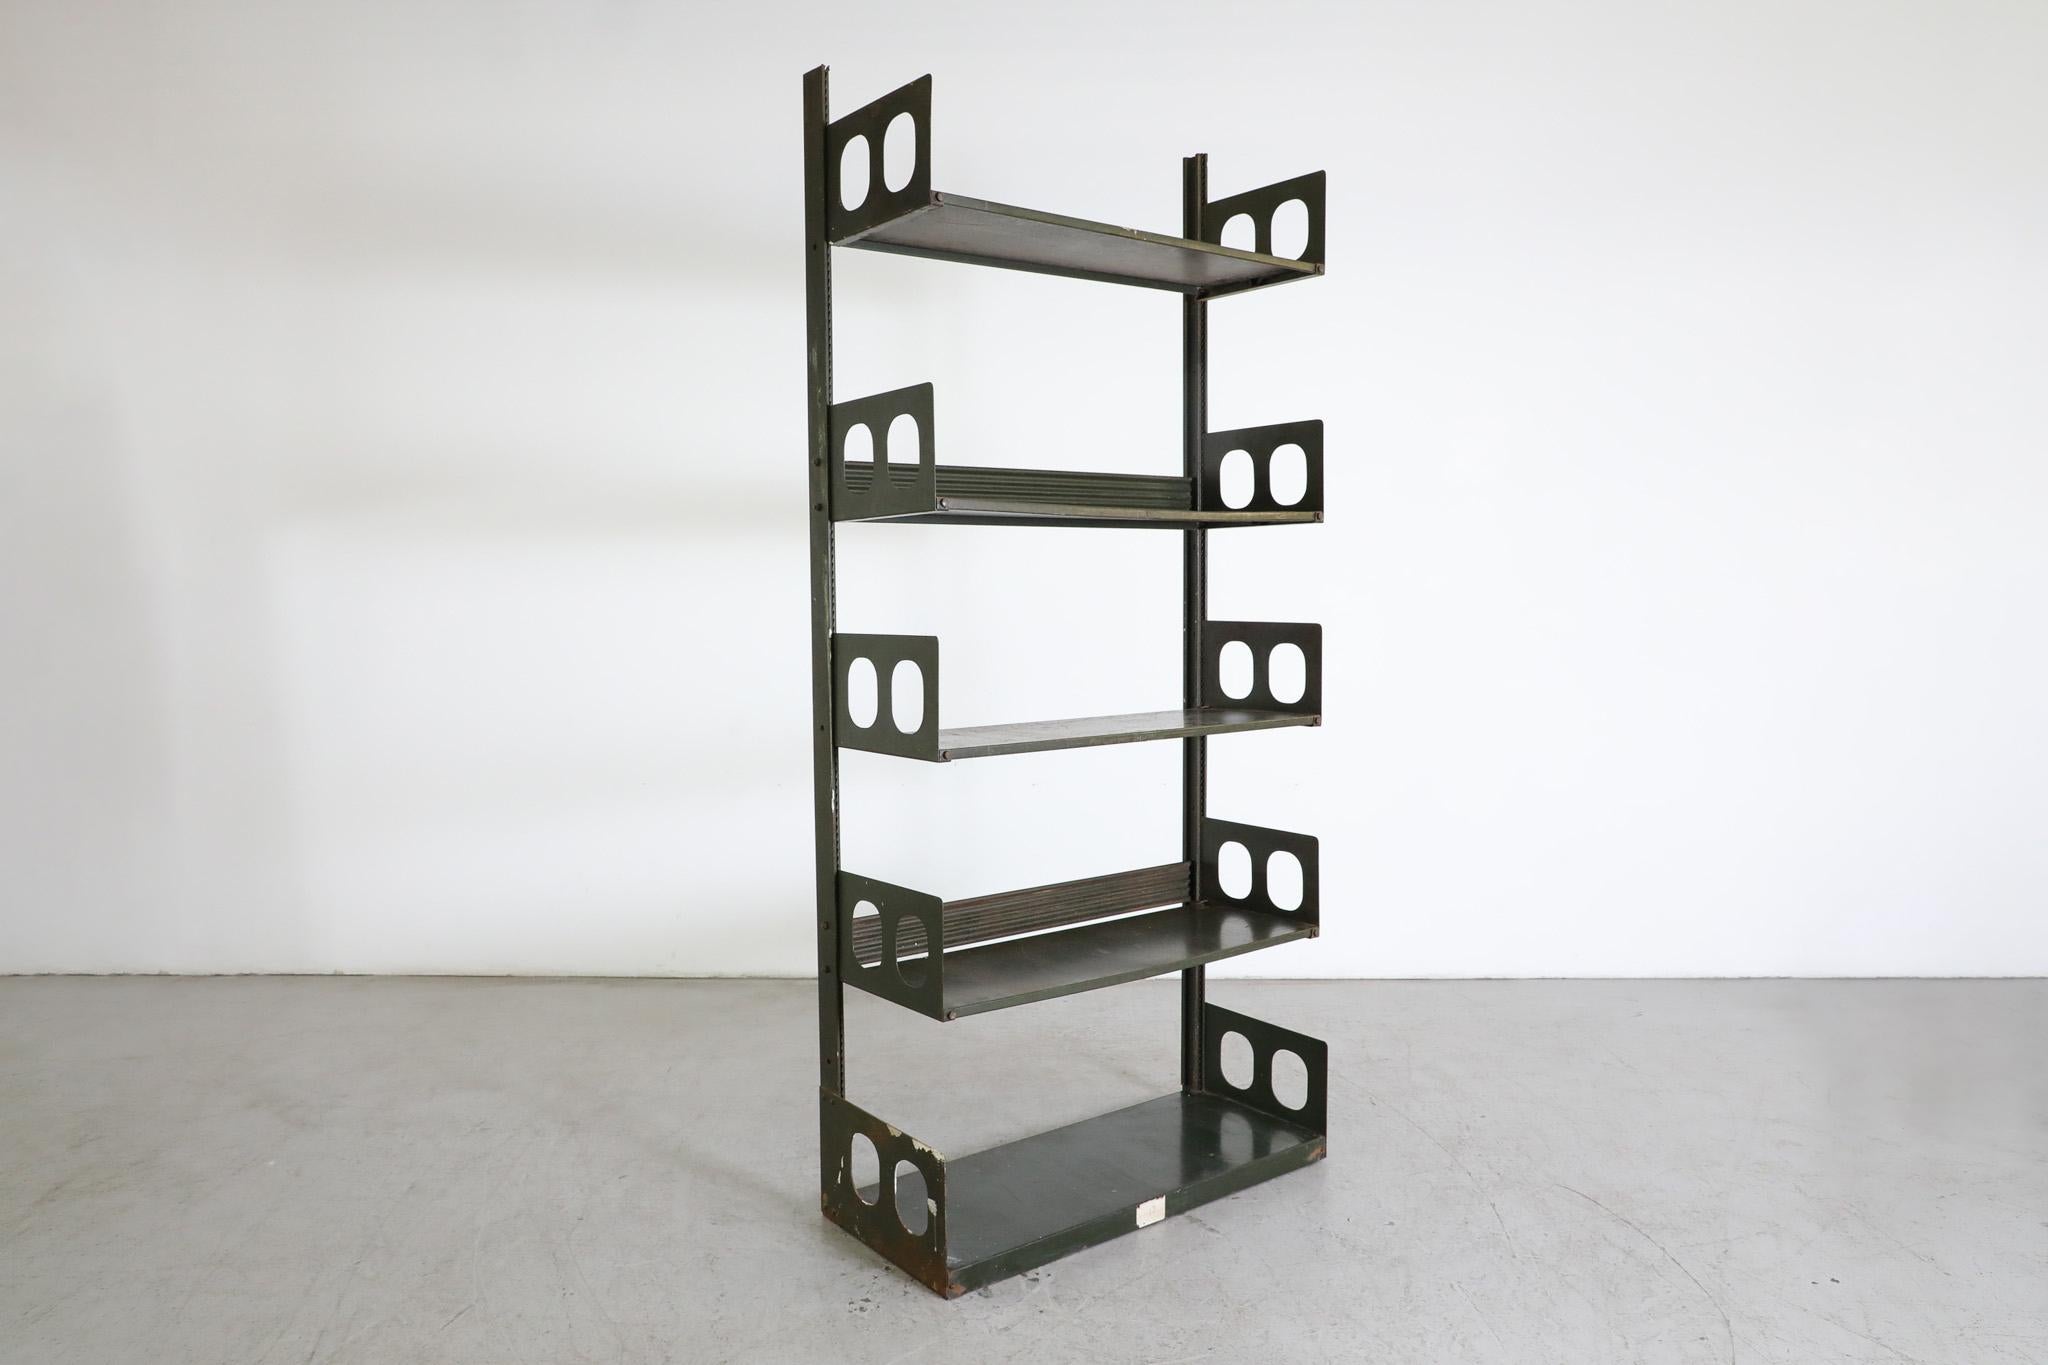 Stunning, Mid-Century, Lips Vago 'Triennale' steel shelving units or bookcases. Made in Italy and designed in 1954 for the Triennale Milano. Lips Vago was a collaboration between the Italian blacksmith company Vago and the Dutch locker company Lips.